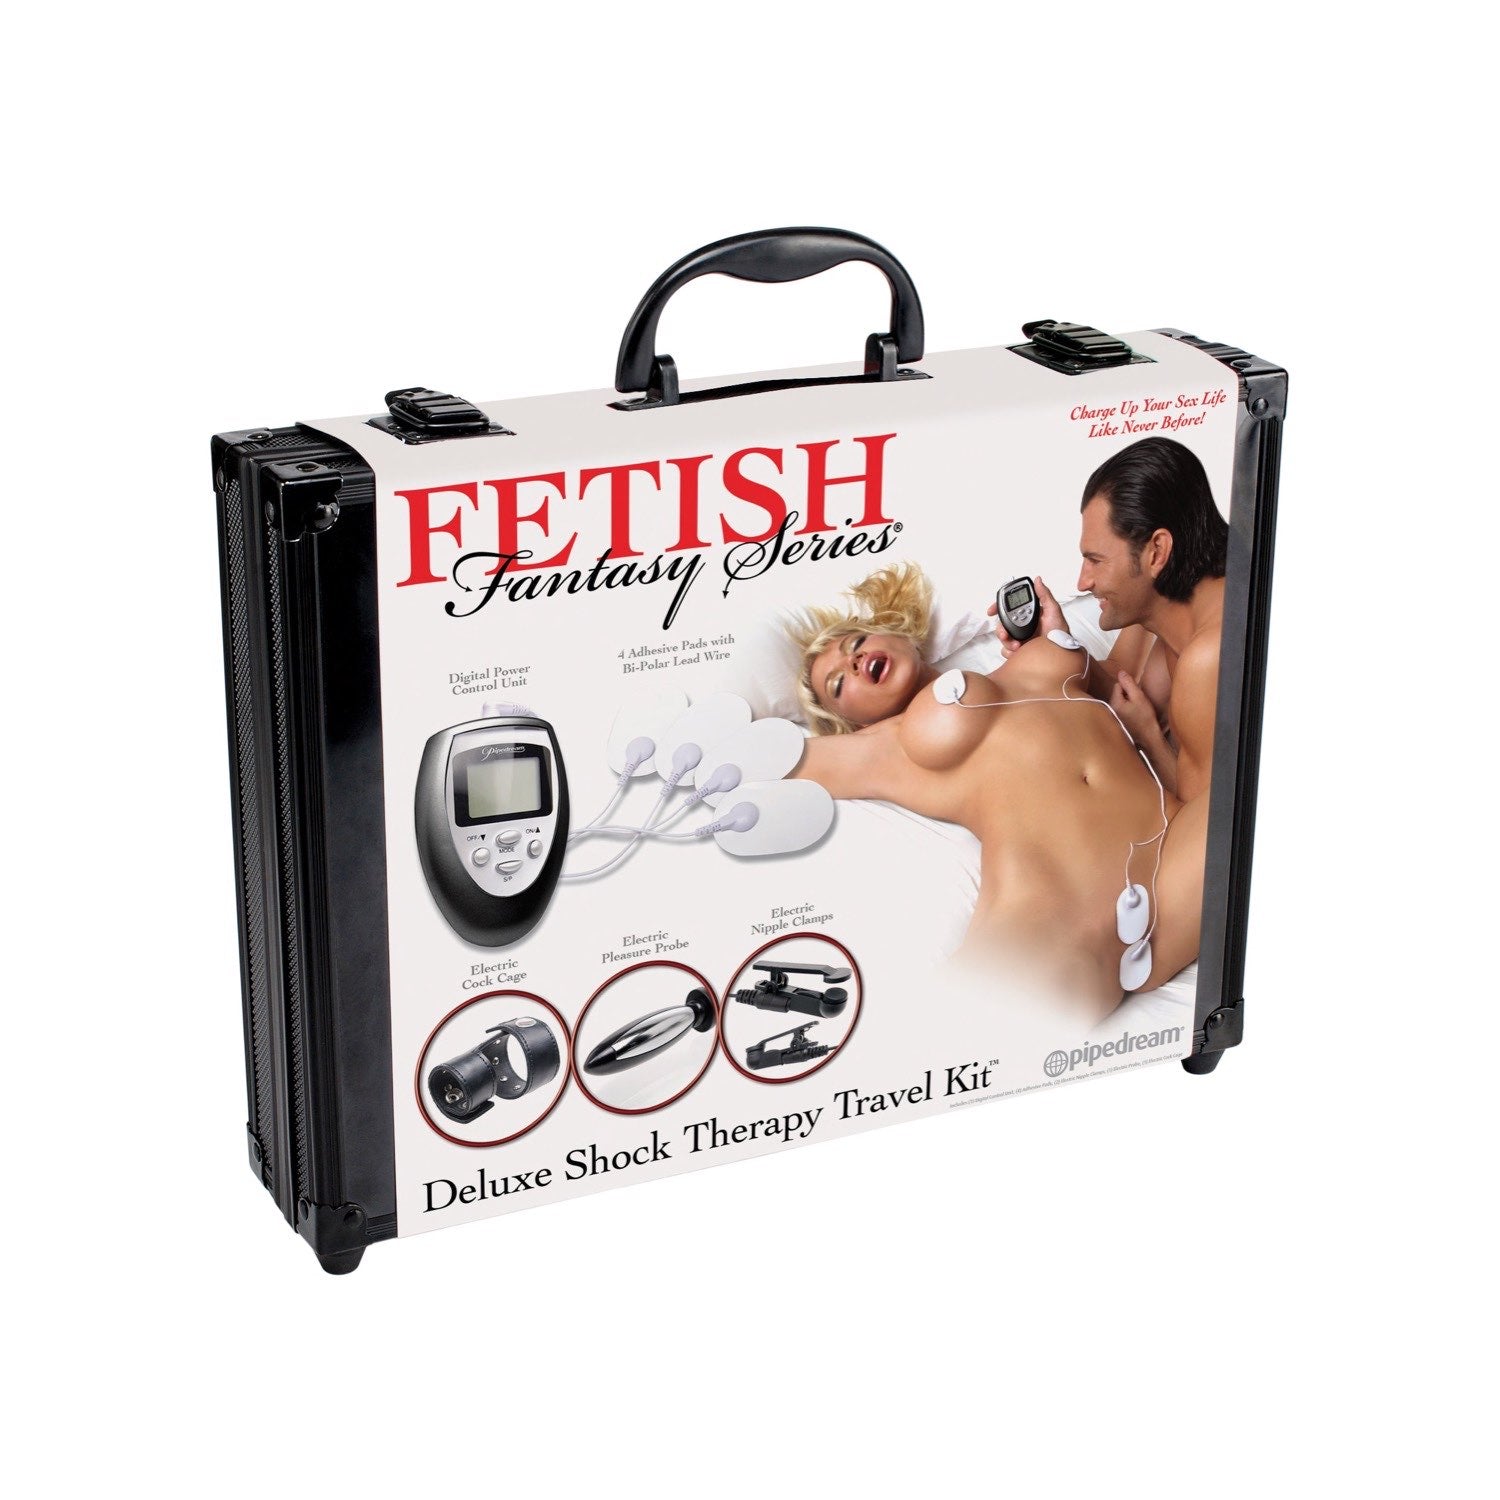 Fetish Fantasy Series Deluxe Shock Therapy Travel Kit - Electrical Stimulator Kit - 6 Piece Set by Pipedream